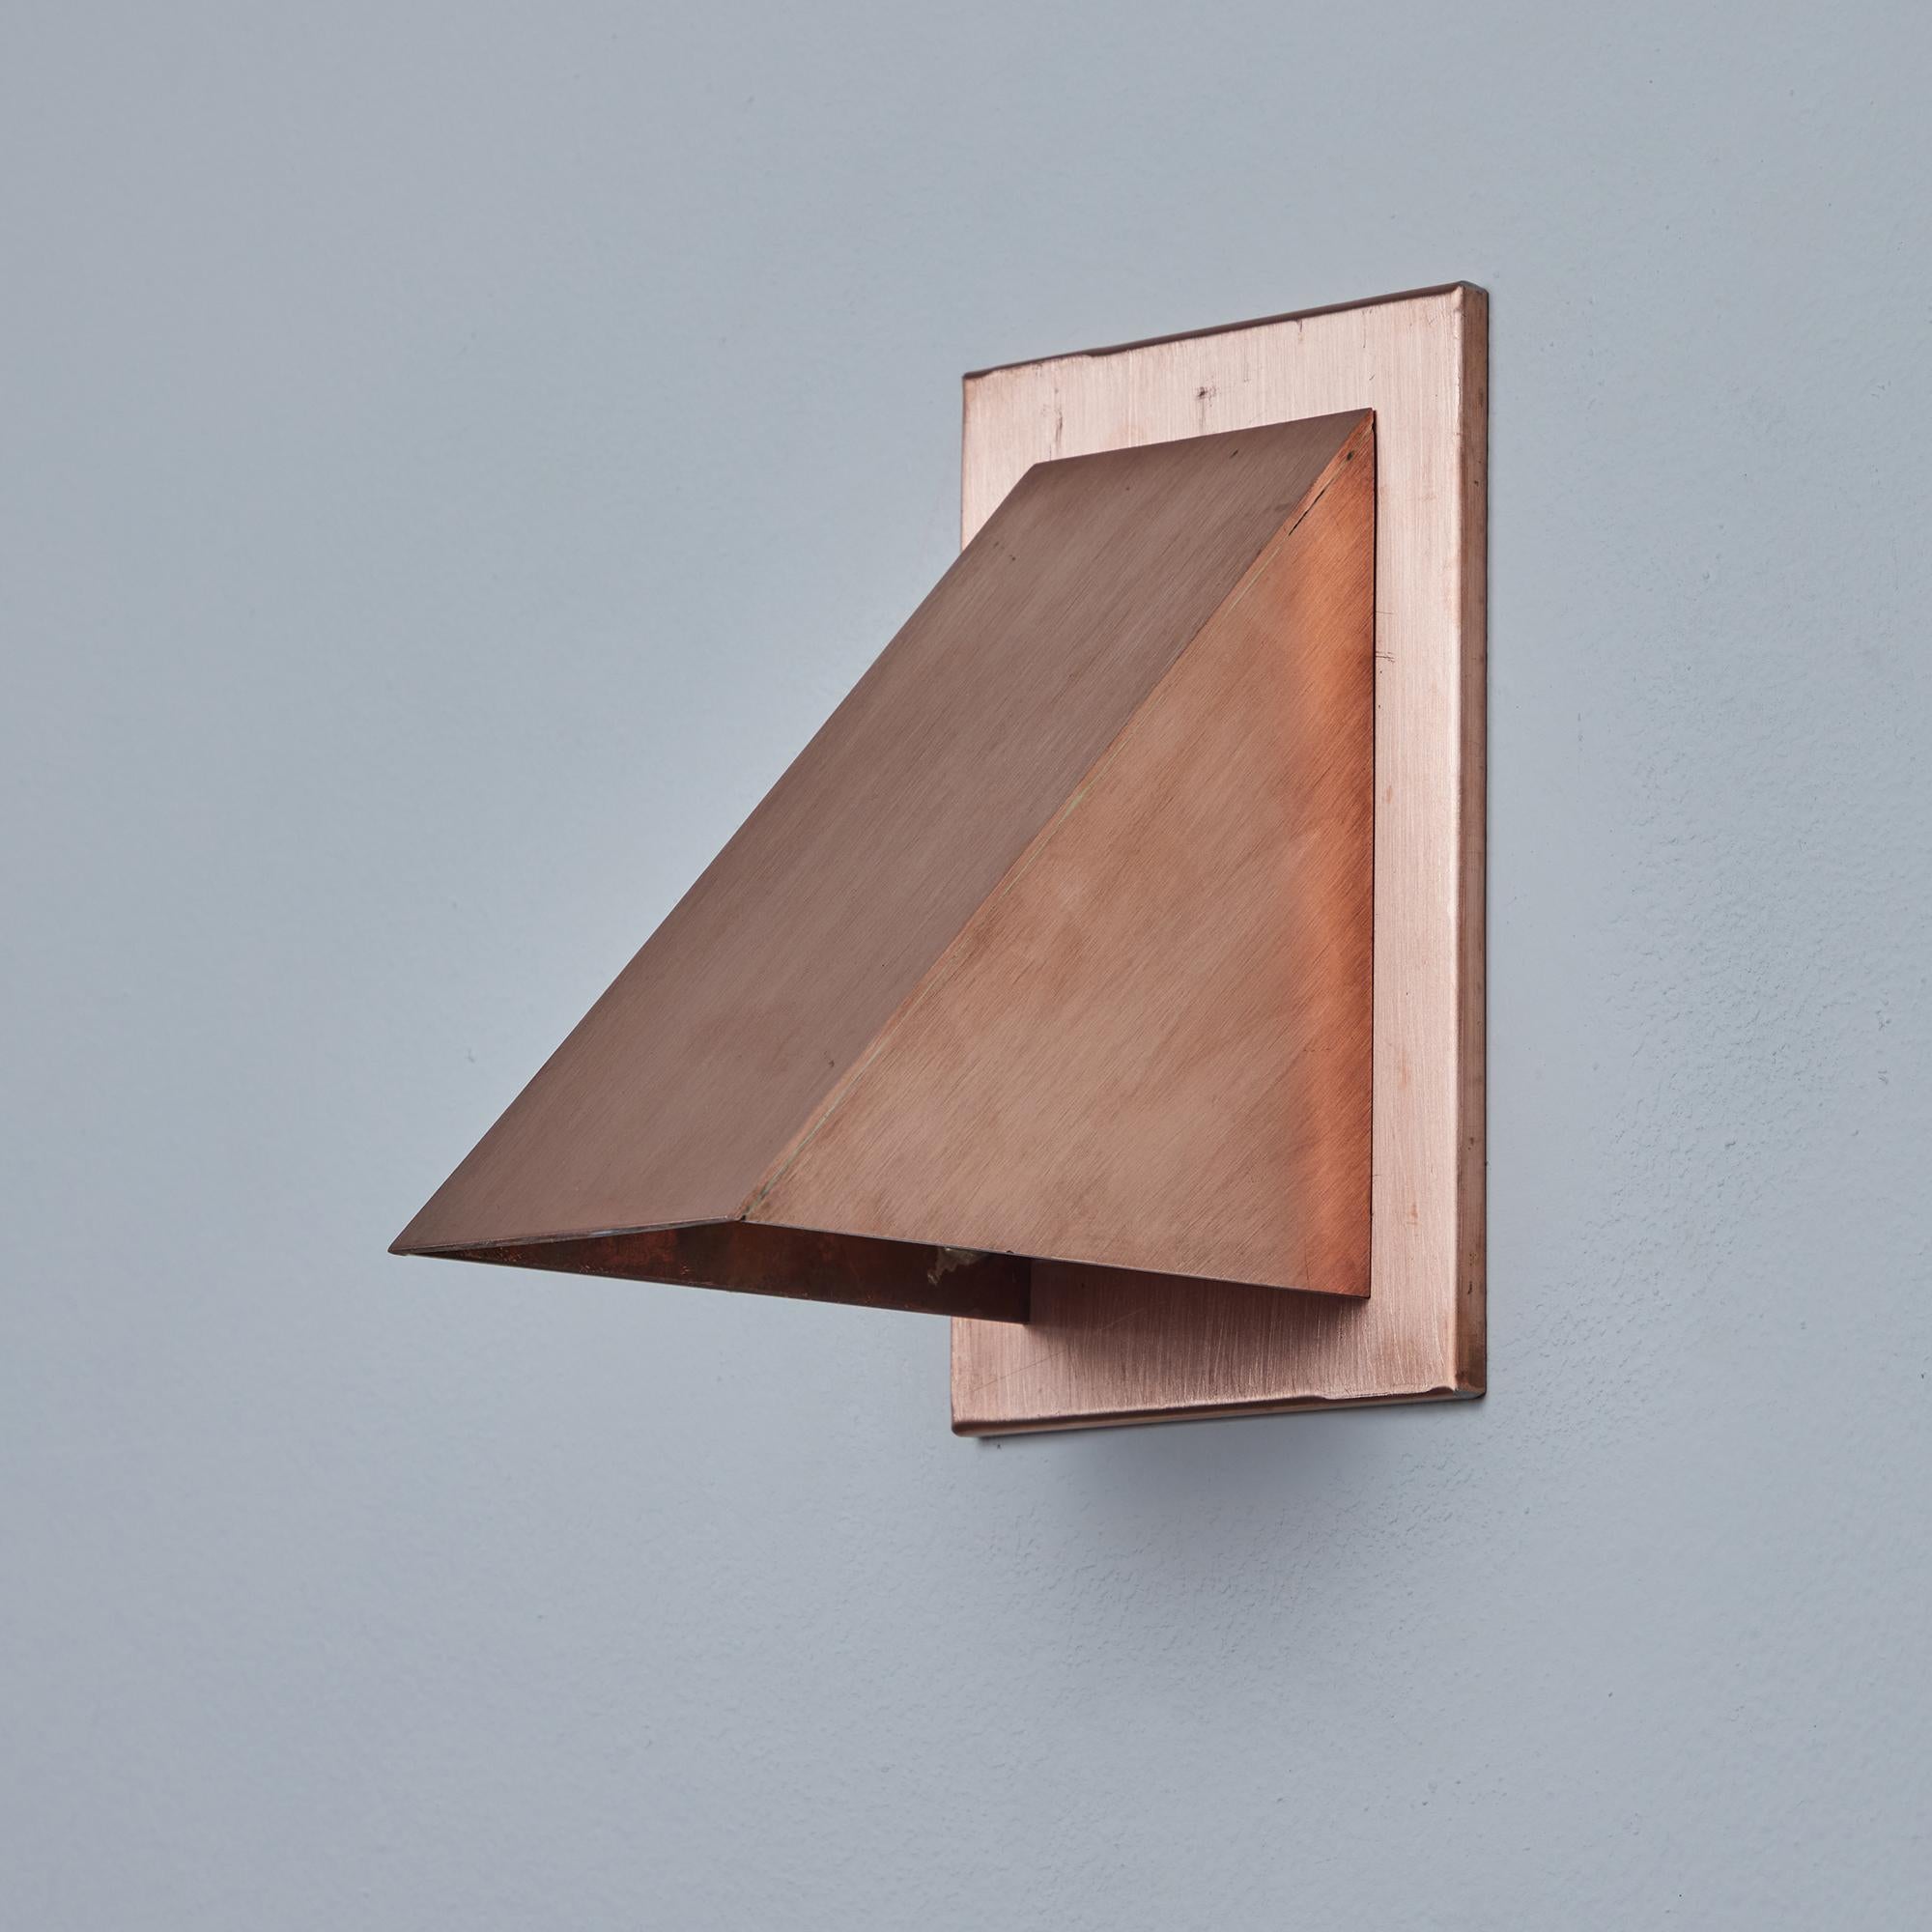 Jonas Bohlin 'Oxid' Raw Copper Outdoor Wall Light for Örsjö. Executed in raw unlacquered copper with an opaline glass diffuser. An incredibly refined and clean geometric design that is quintessentially Scandinavian. For indoor or outdoor use.

Price